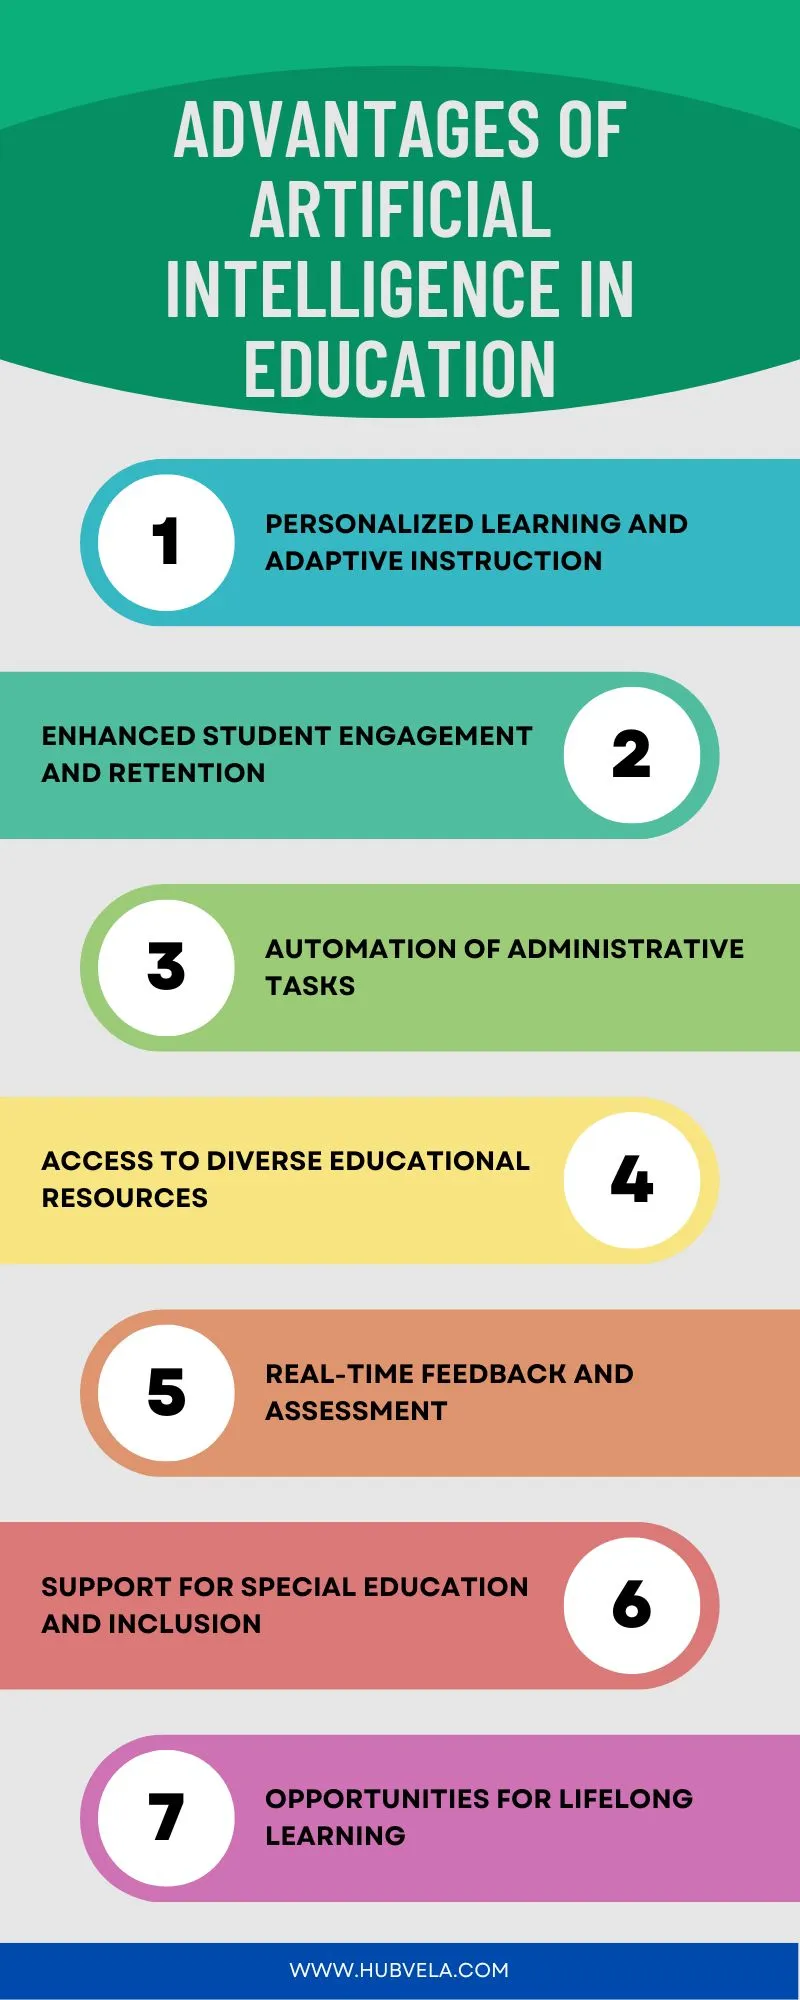 Advantages of Artificial Intelligence in Education Infographic